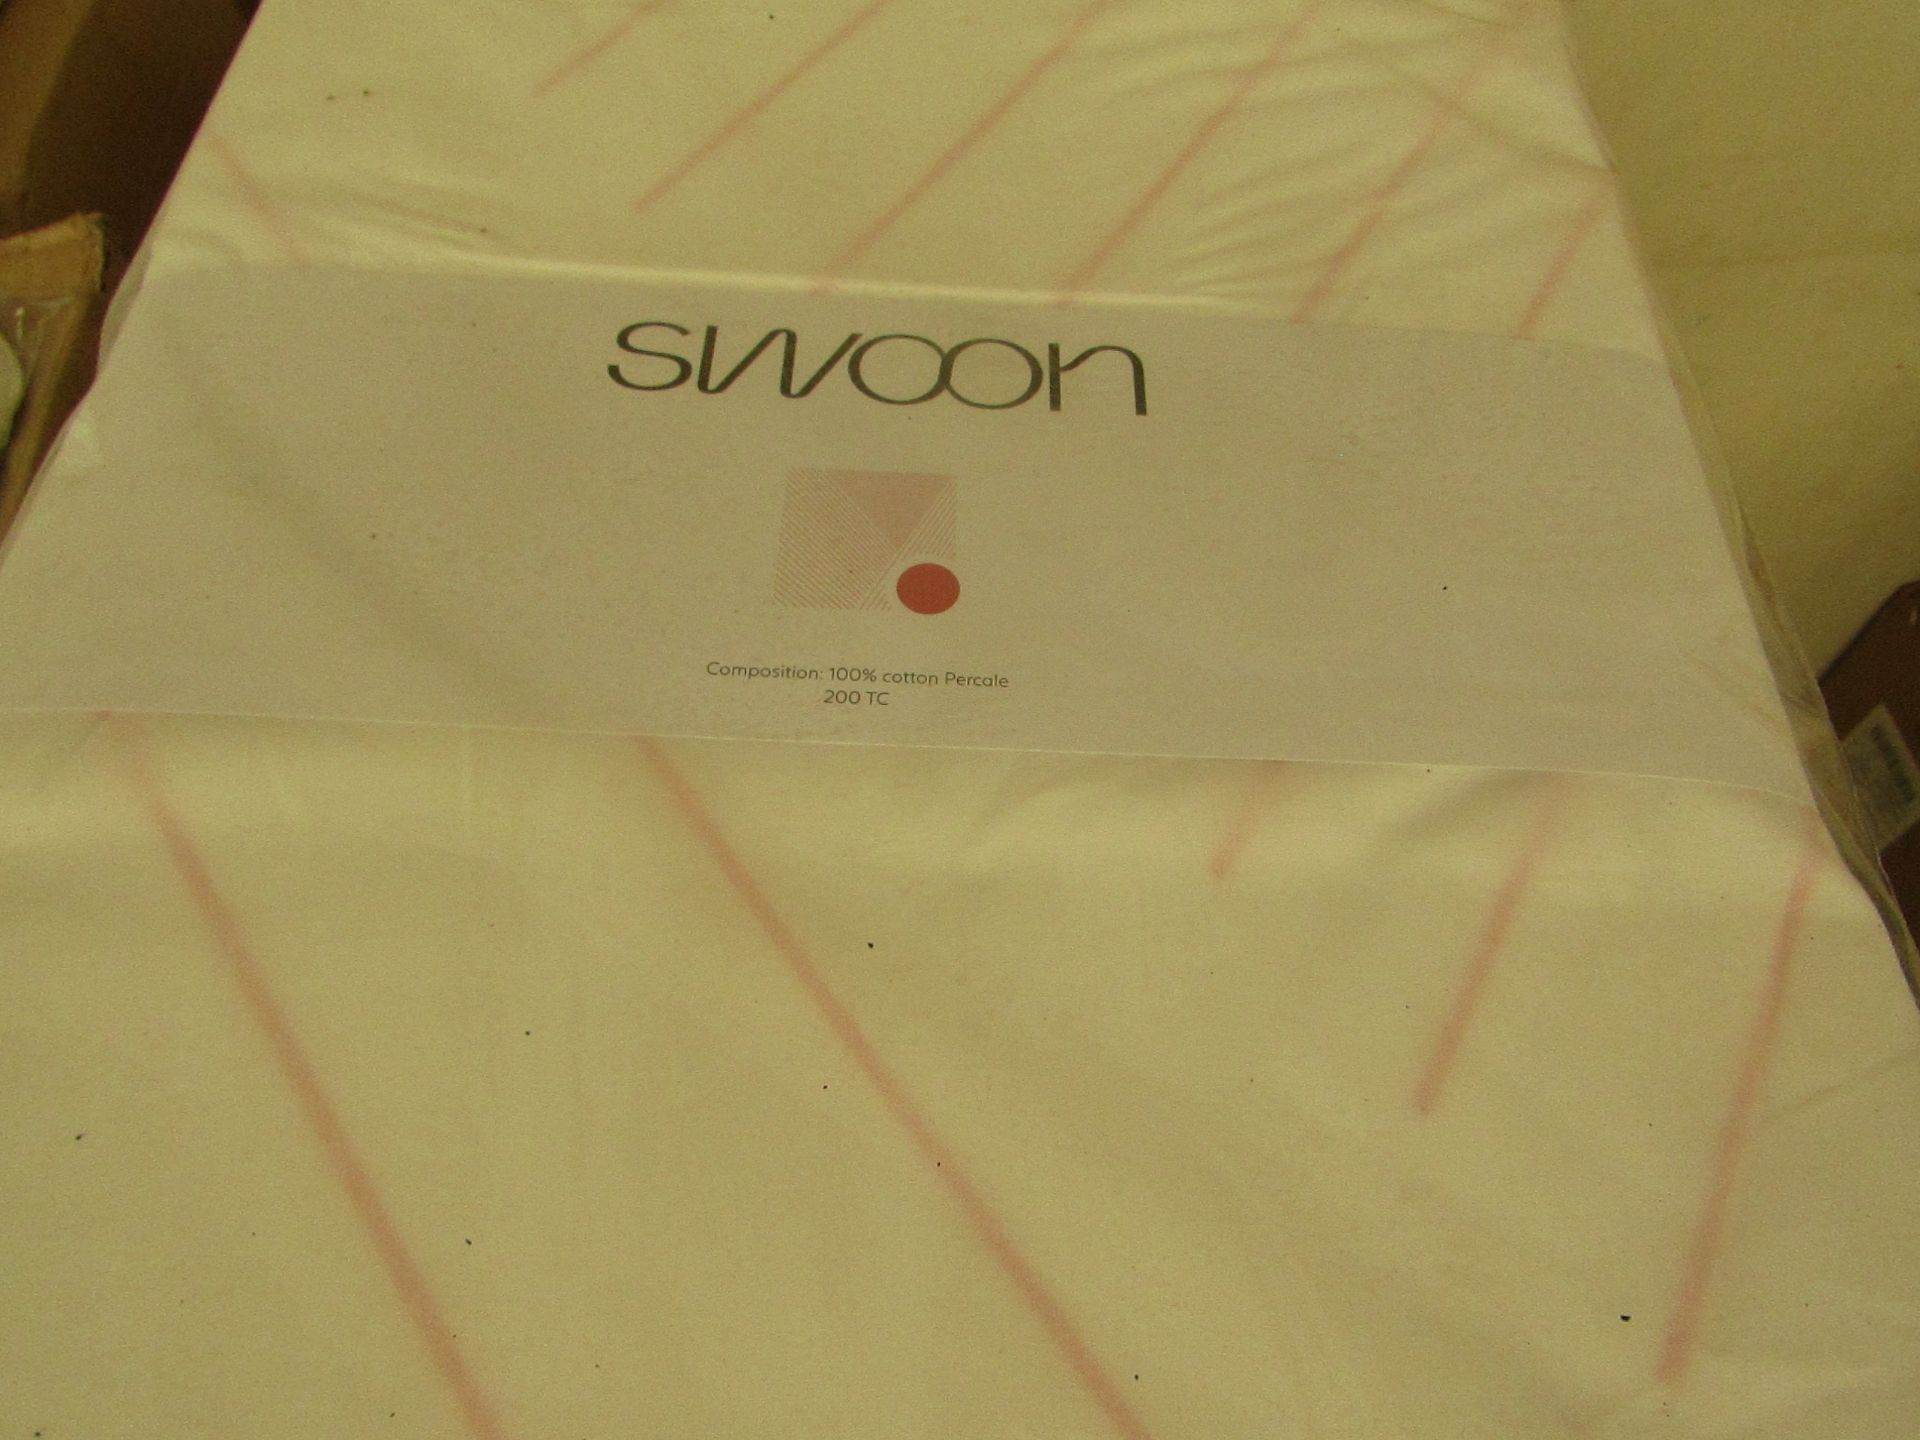 |1x SWOON BOOLE PINK KING SIZE DUVET SET THAT INCLUDE DUVET COVER AND 2 MATCHING PILLOW CASES |